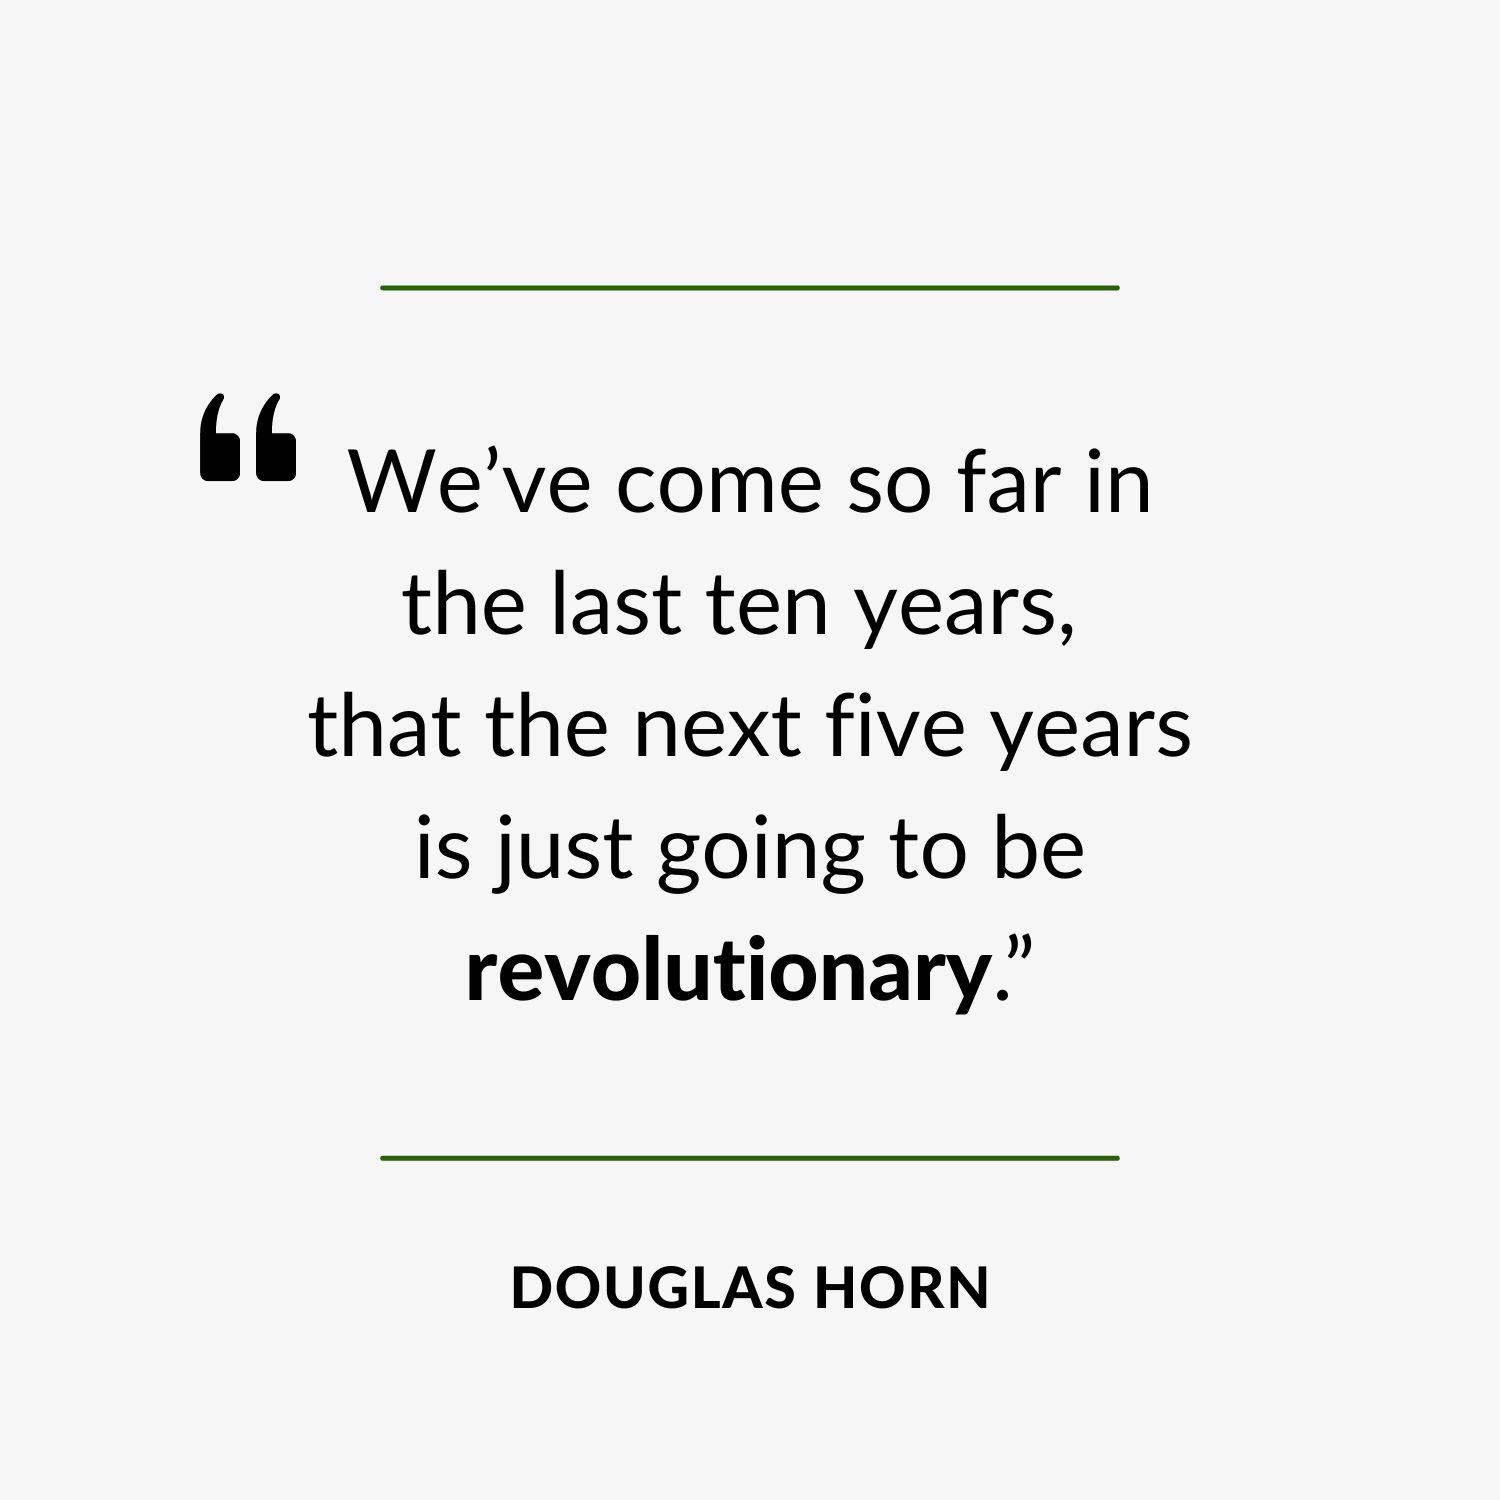 Website Quote - “We’ve come so far in the last ten years, that the next five years is just going to be revolutionary.” 